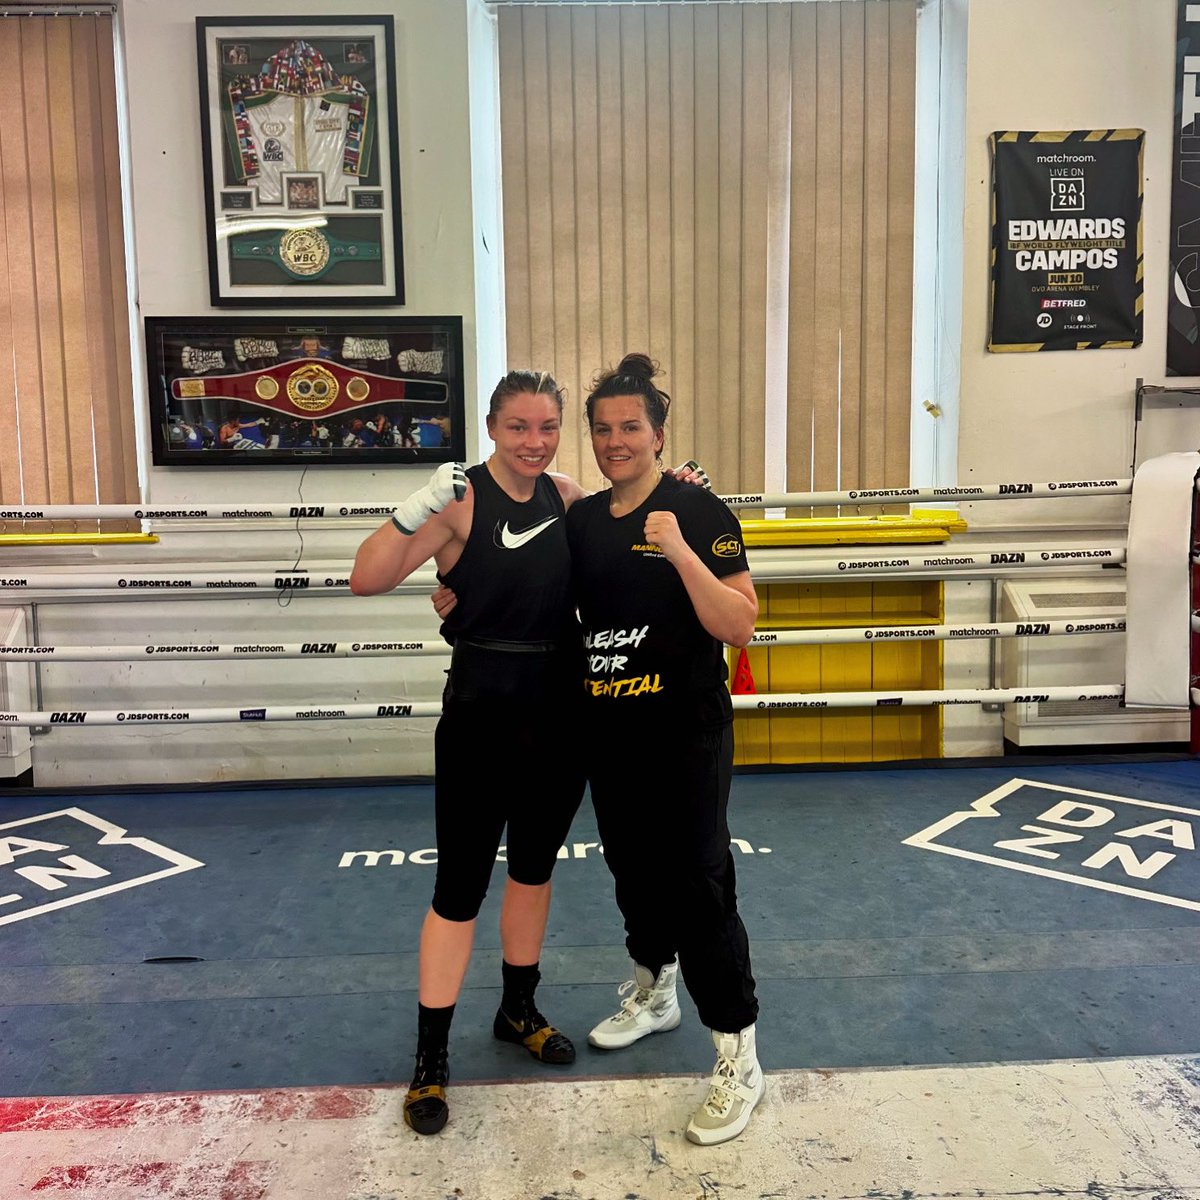 World class rounds banked with @chantellecam this morning 🤜🏼🤛🏼 #McCaskillPrice #May11th